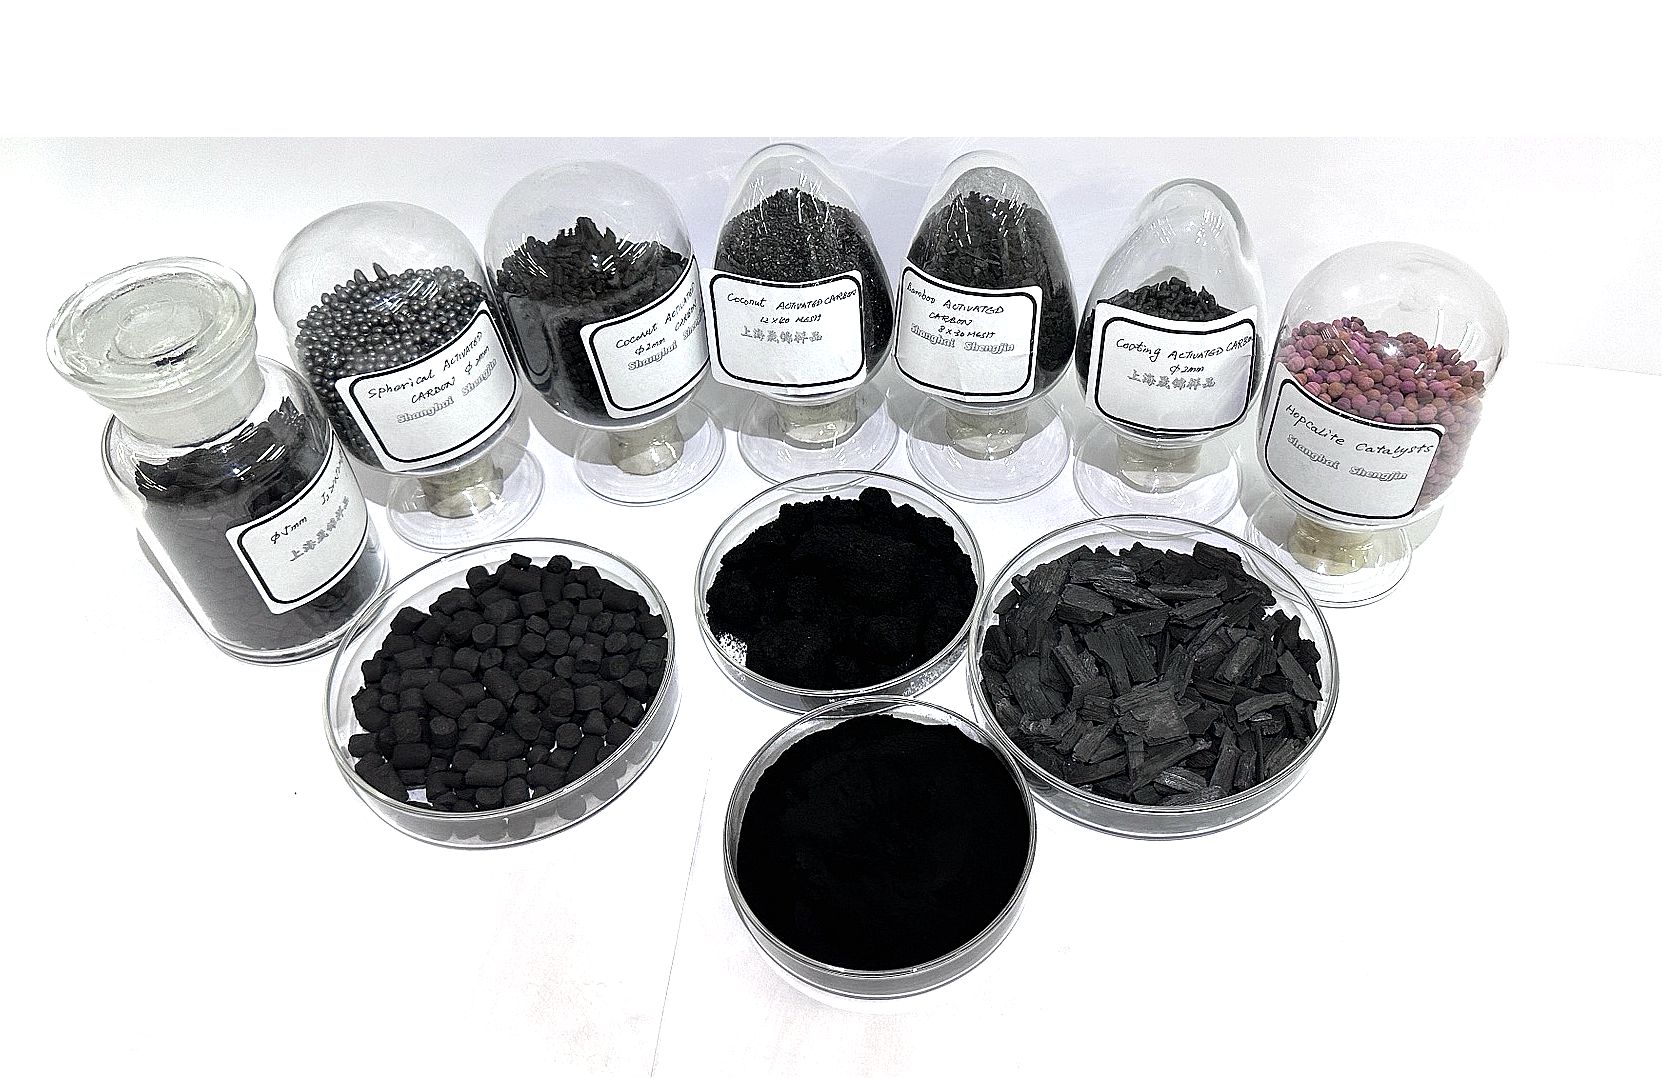 SJ Factory Supply CTC60 4mm Pellet Activated Carbon Gas Cleaning Processes for Adsorption Organic Substance / Solvent Recovery